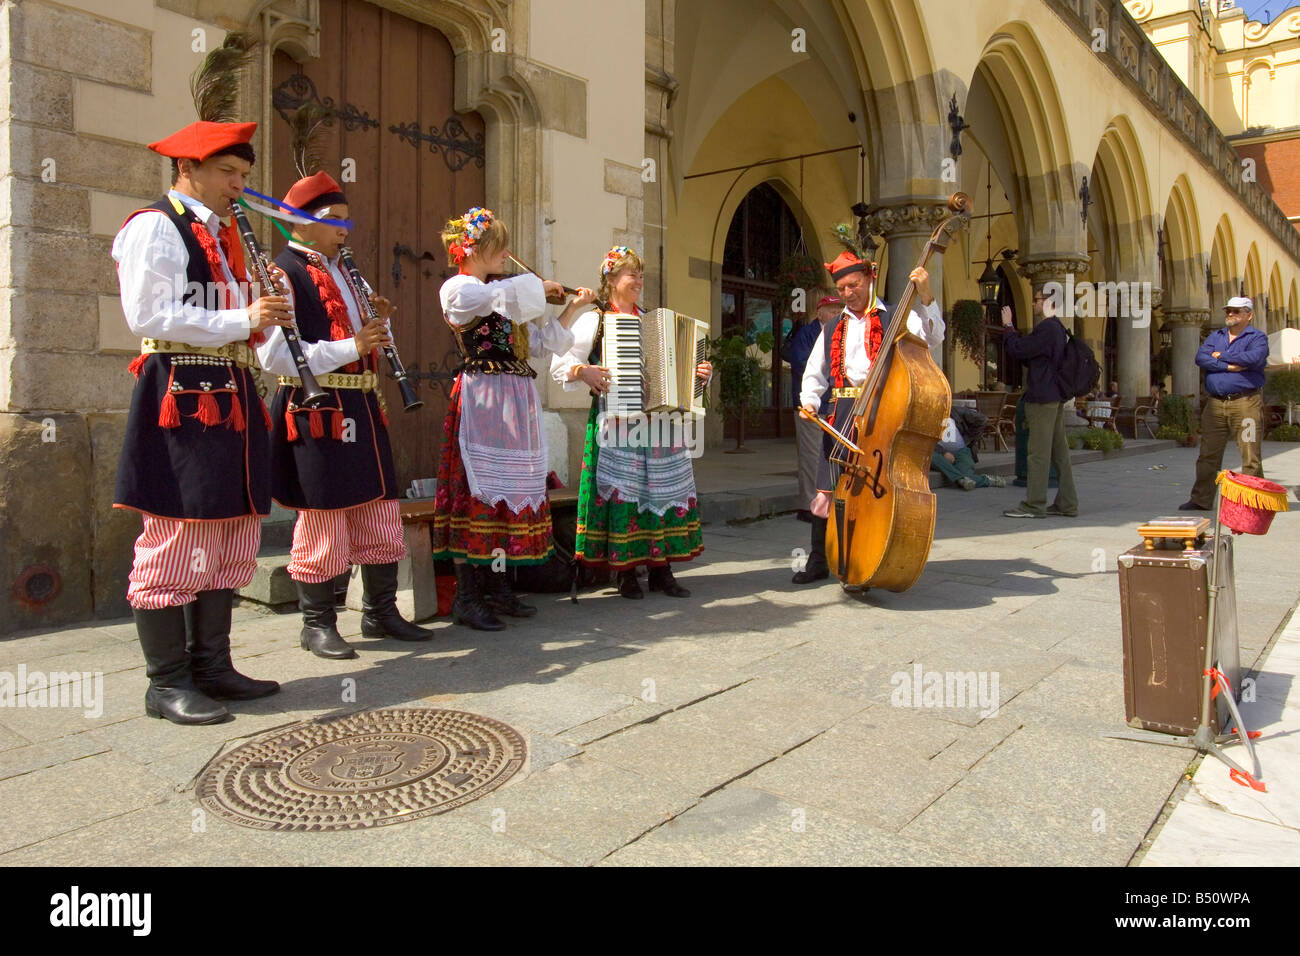 Street performers playing in the Main Market Square of Krakow with the Sukiennice Cloth Hall building behind them. Stock Photo